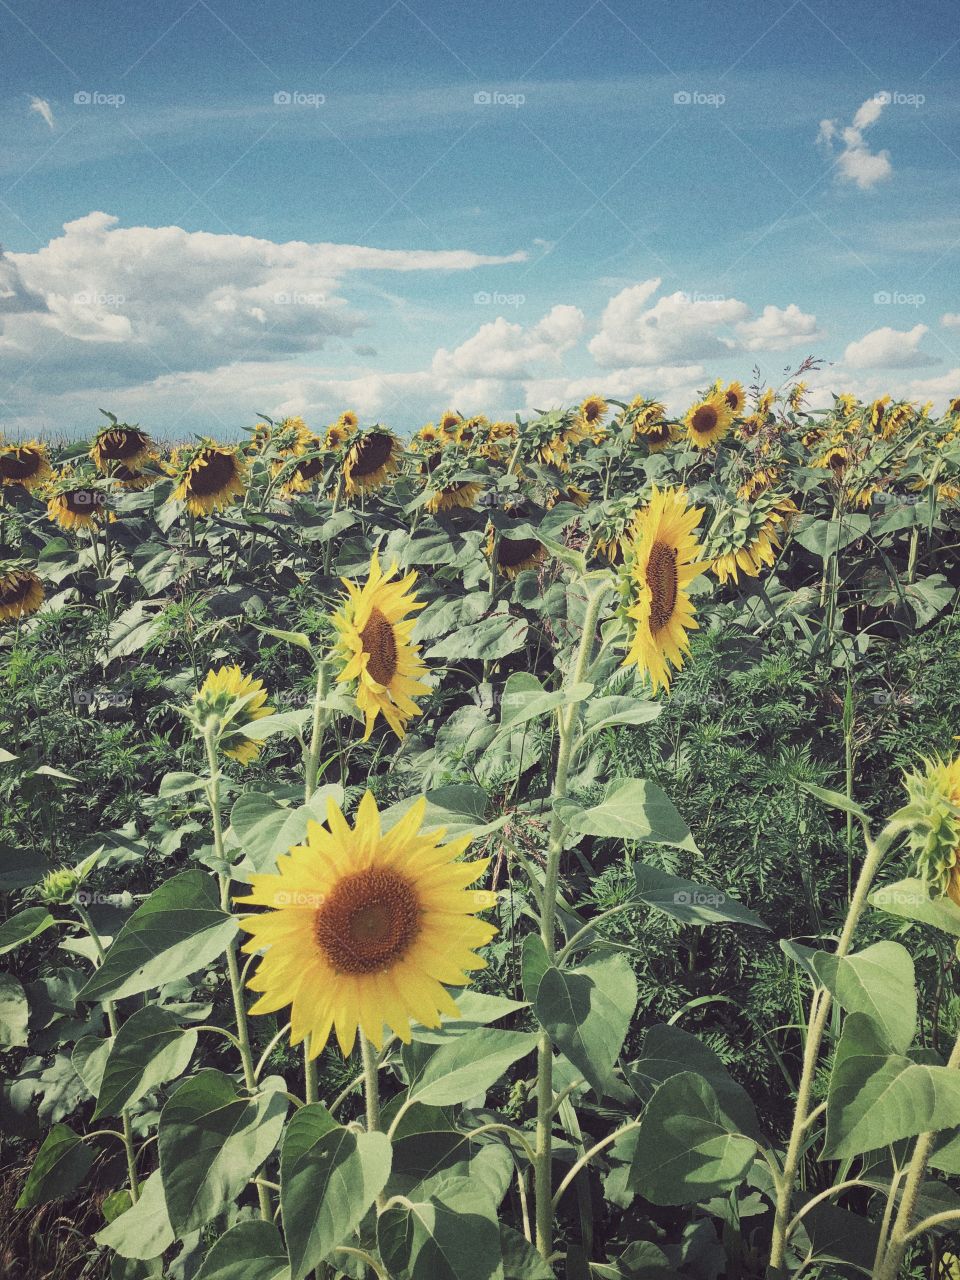 Those precious summer days. The sky, the sunflowers, blue and gold. And a lots and lots of green. 